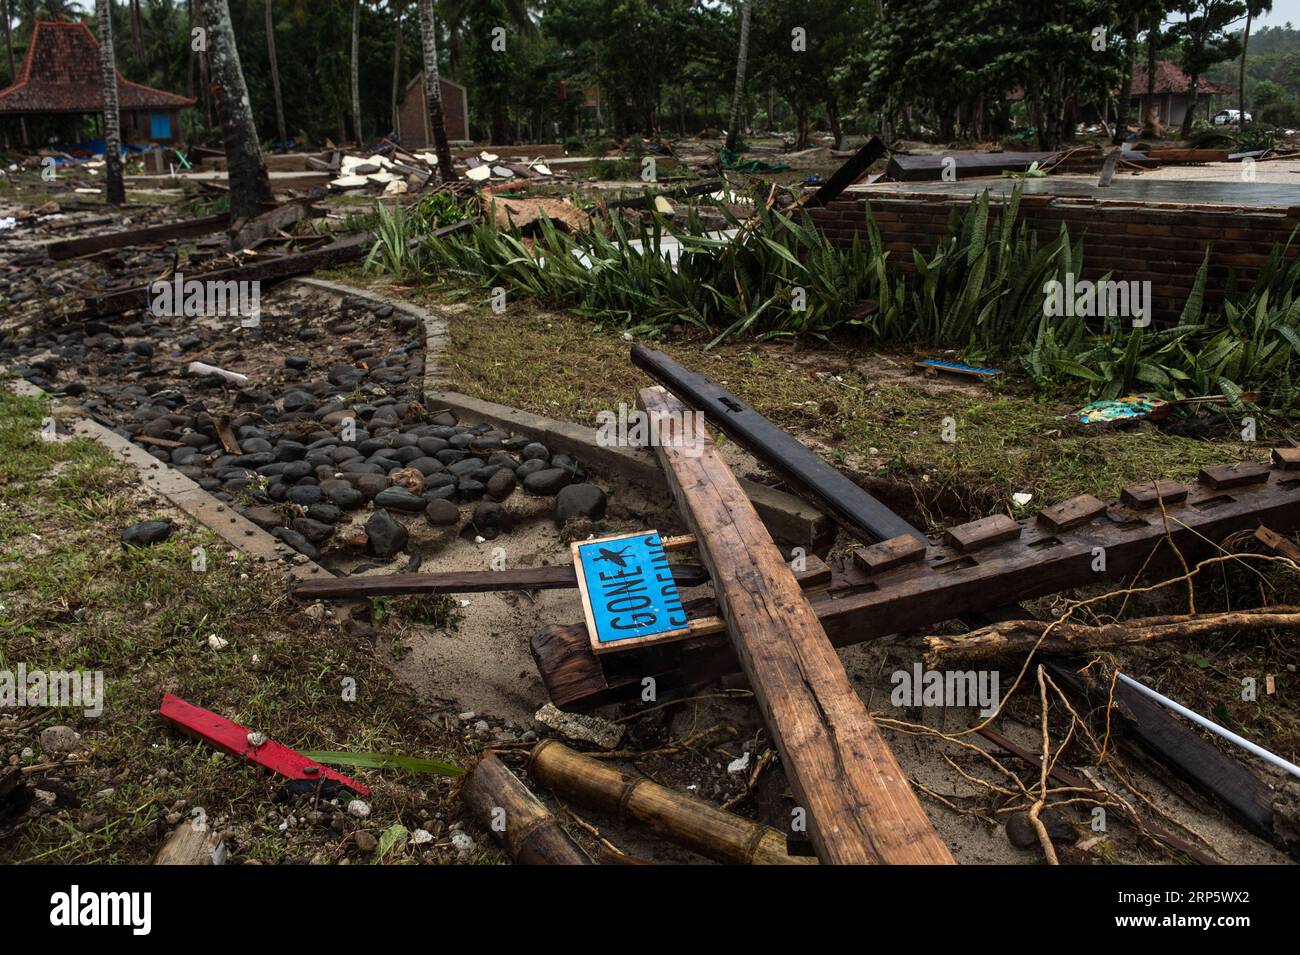 (181225) -- PANDEGLANG, Dec. 25, 2018 -- Debris is seen at Tanjung Lesung district of Pandeglang, Banten Province, Indonesia, Dec. 25, 2018. Casualty from the tsunami triggered by a volcanic eruption in Sunda Strait in Indonesia climbed to 429 people on Tuesday, spokesman of national disaster management agency Sutopo Purwo Nugroho told a press conference. ) INDONESIA-PANDEGLANG-TSUNAMI-AFTERMATH VerixSanovri PUBLICATIONxNOTxINxCHN Stock Photo